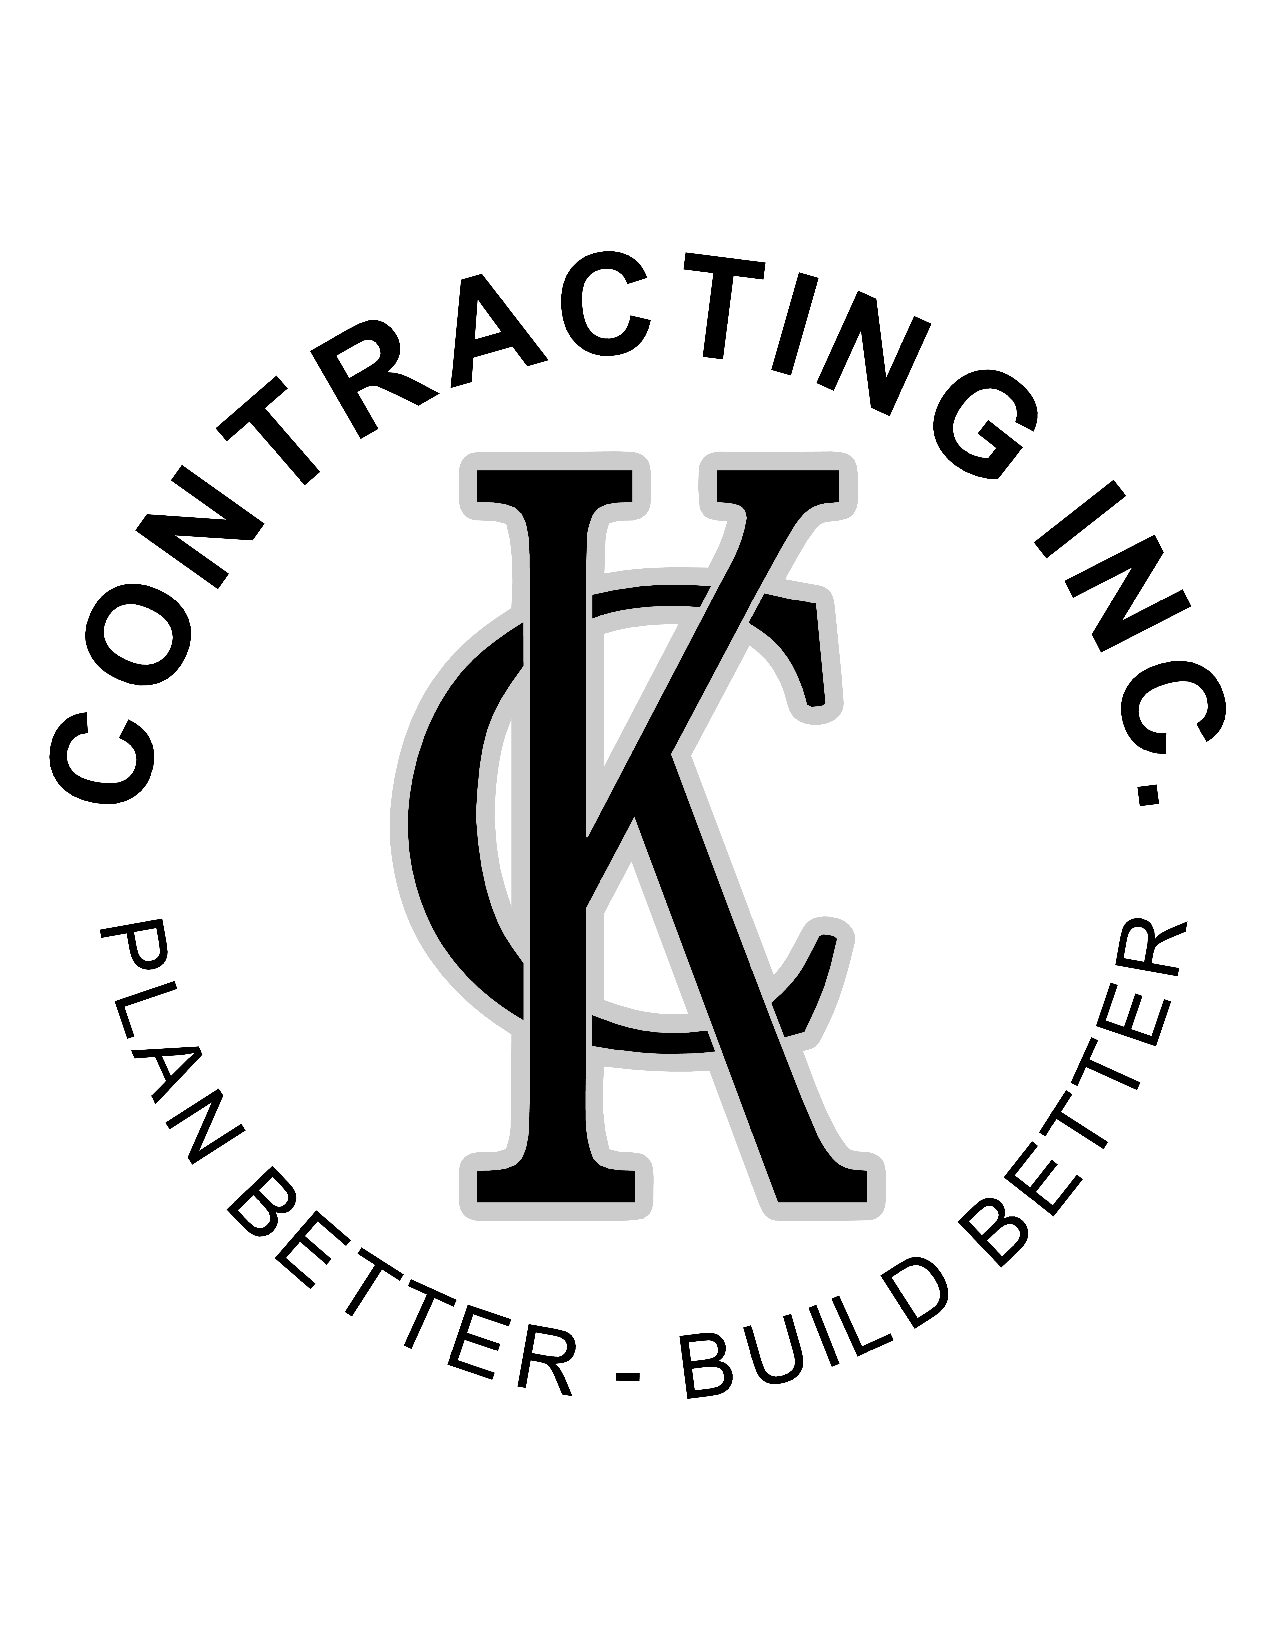 KC Contracting